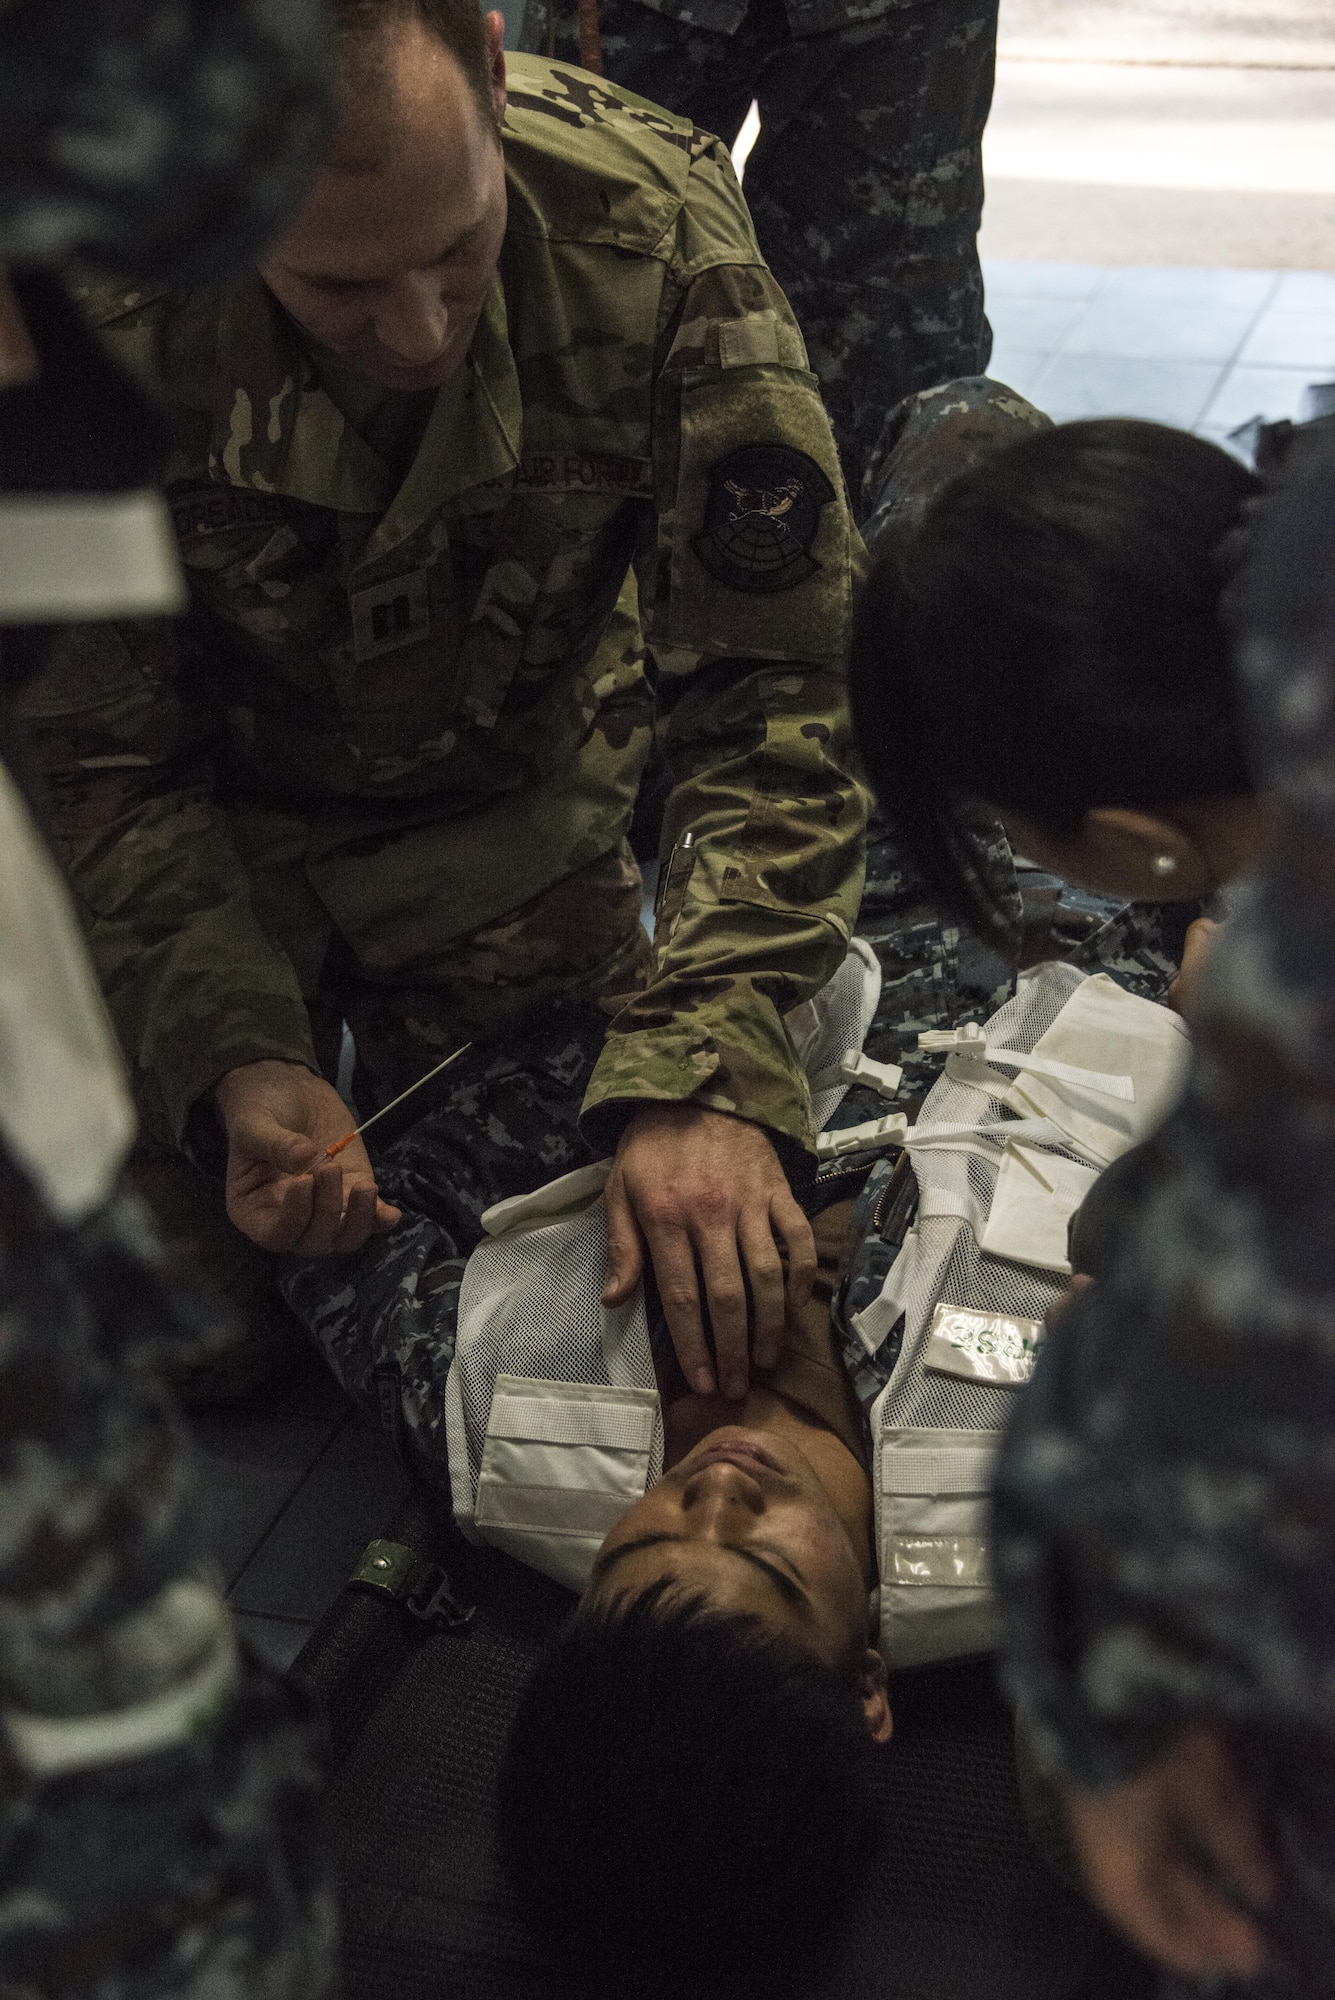 U.S. Air Force Capt. Zachary Dreaden, 353rd Special Operations Support Squadron flight surgeon, demonstrates a technique on how to perform a needle decompression to counterparts from the Royal Thai Air Force Wing 1 Hospital during a medical exchange, Feb. 22, 2017 at Korat Air Base, Thailand. The medical activities conducted during Cobra Gold 2017 supported the needs and humanitarian interests of civilian populations across the region. (U.S. Air Force photo by Capt. Jessica Tait)